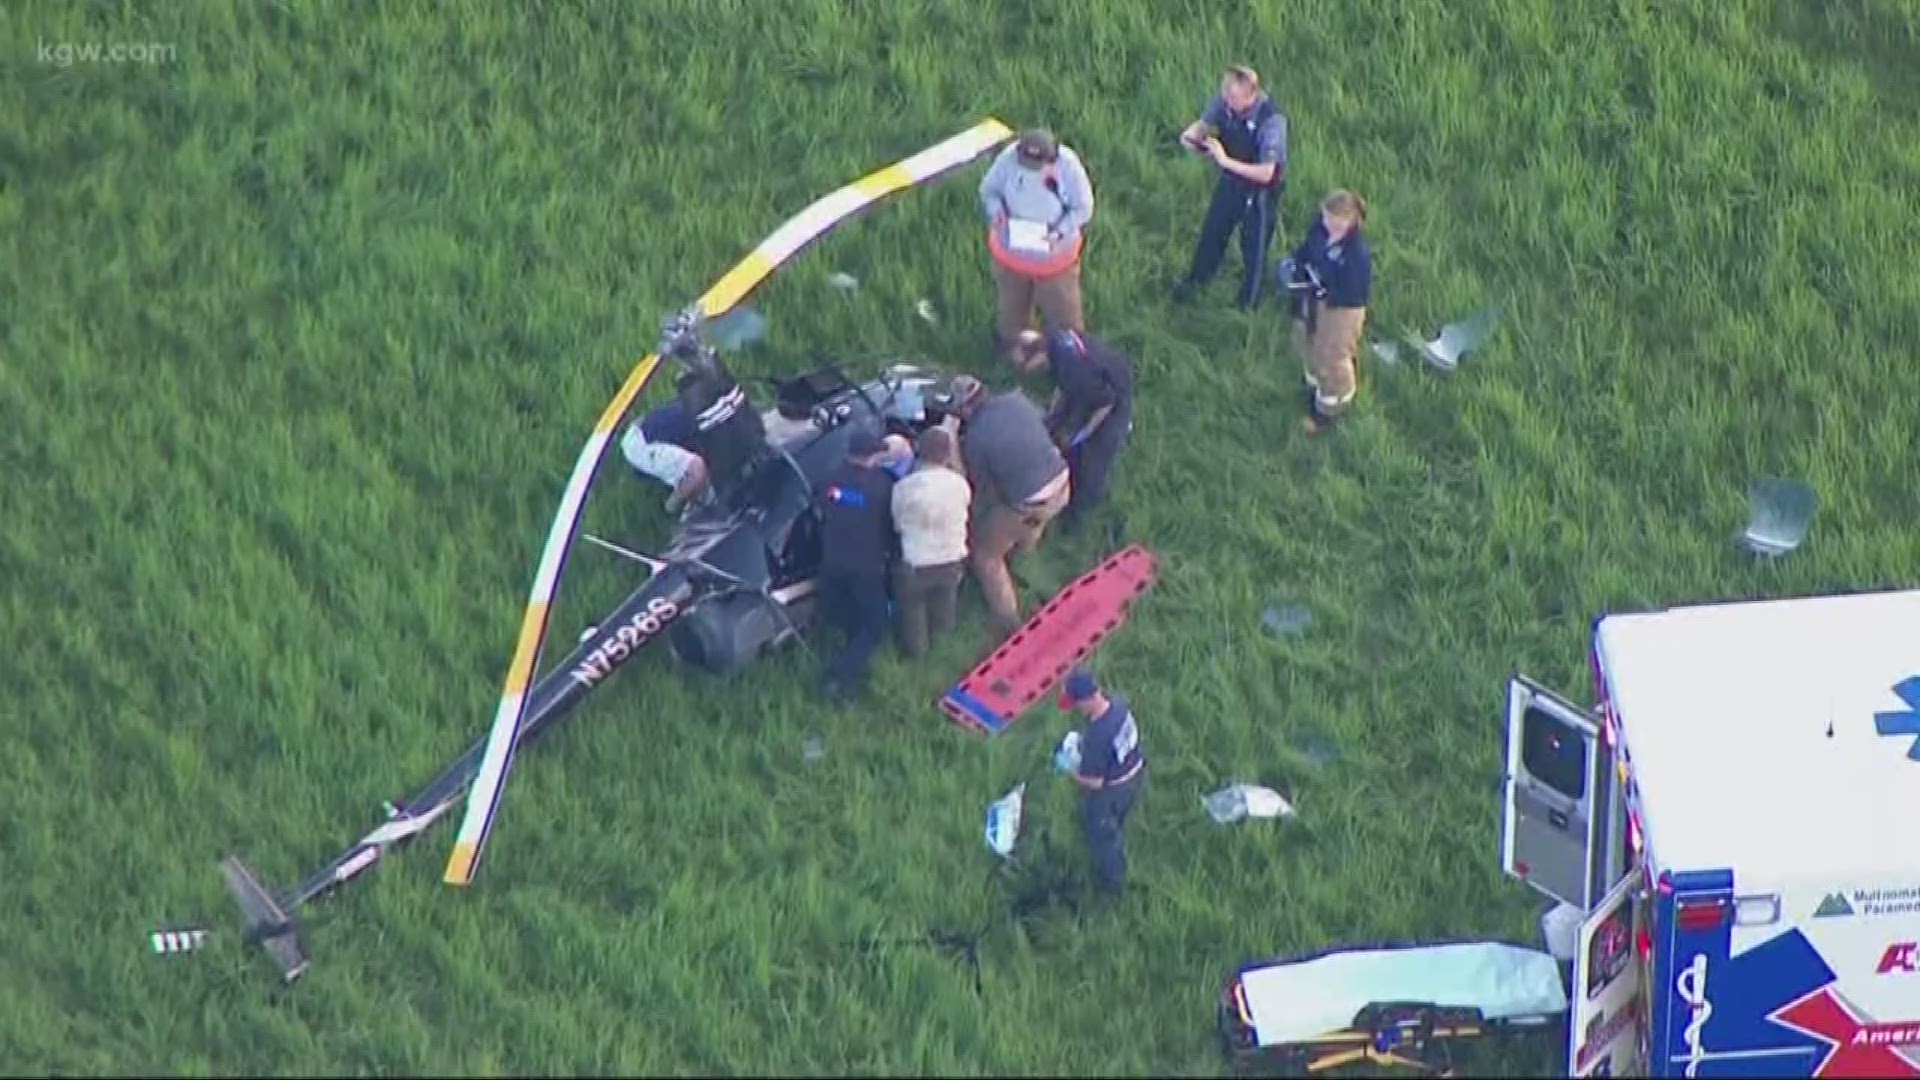 A pilot was seriously injured in a helicopter crash on Sauvie Island